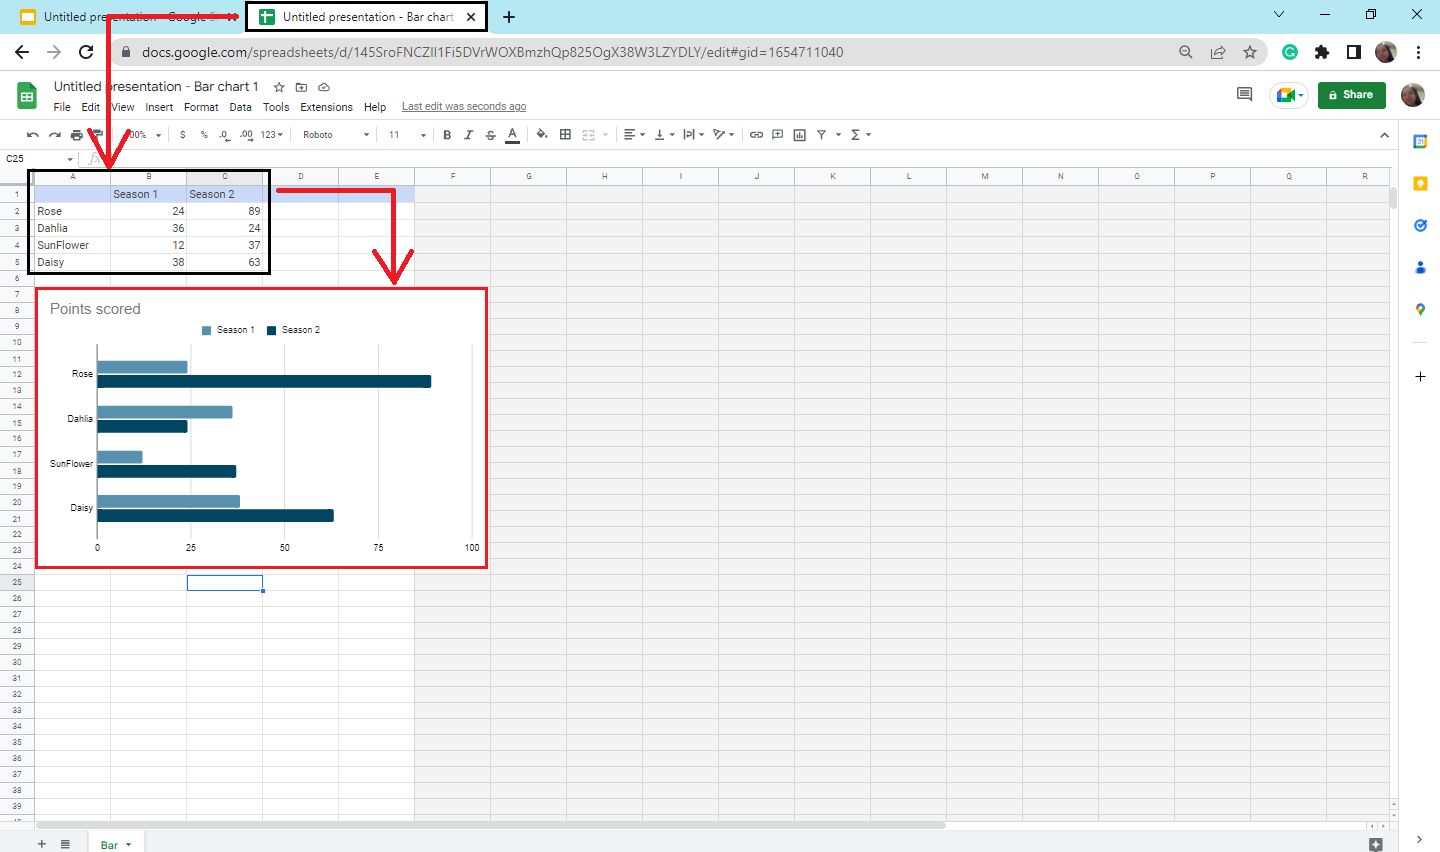 Type your data reports in the Google Sheets and it will appear automatically on your Charts